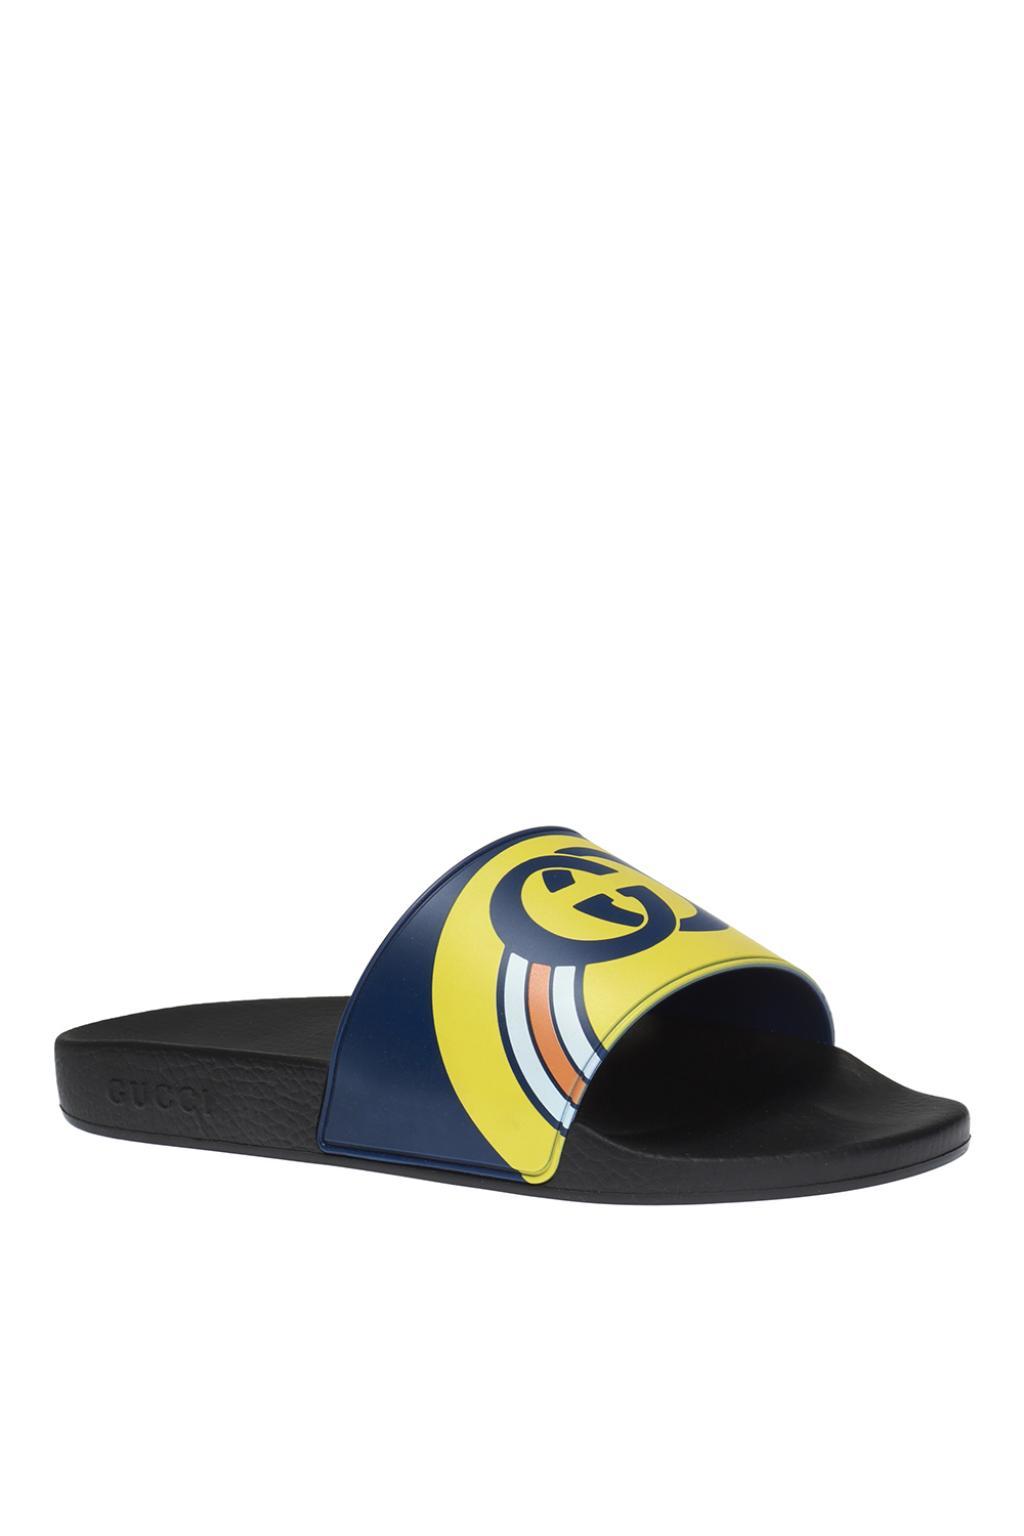 Gucci Rubber Logo Slides in Yellow for 